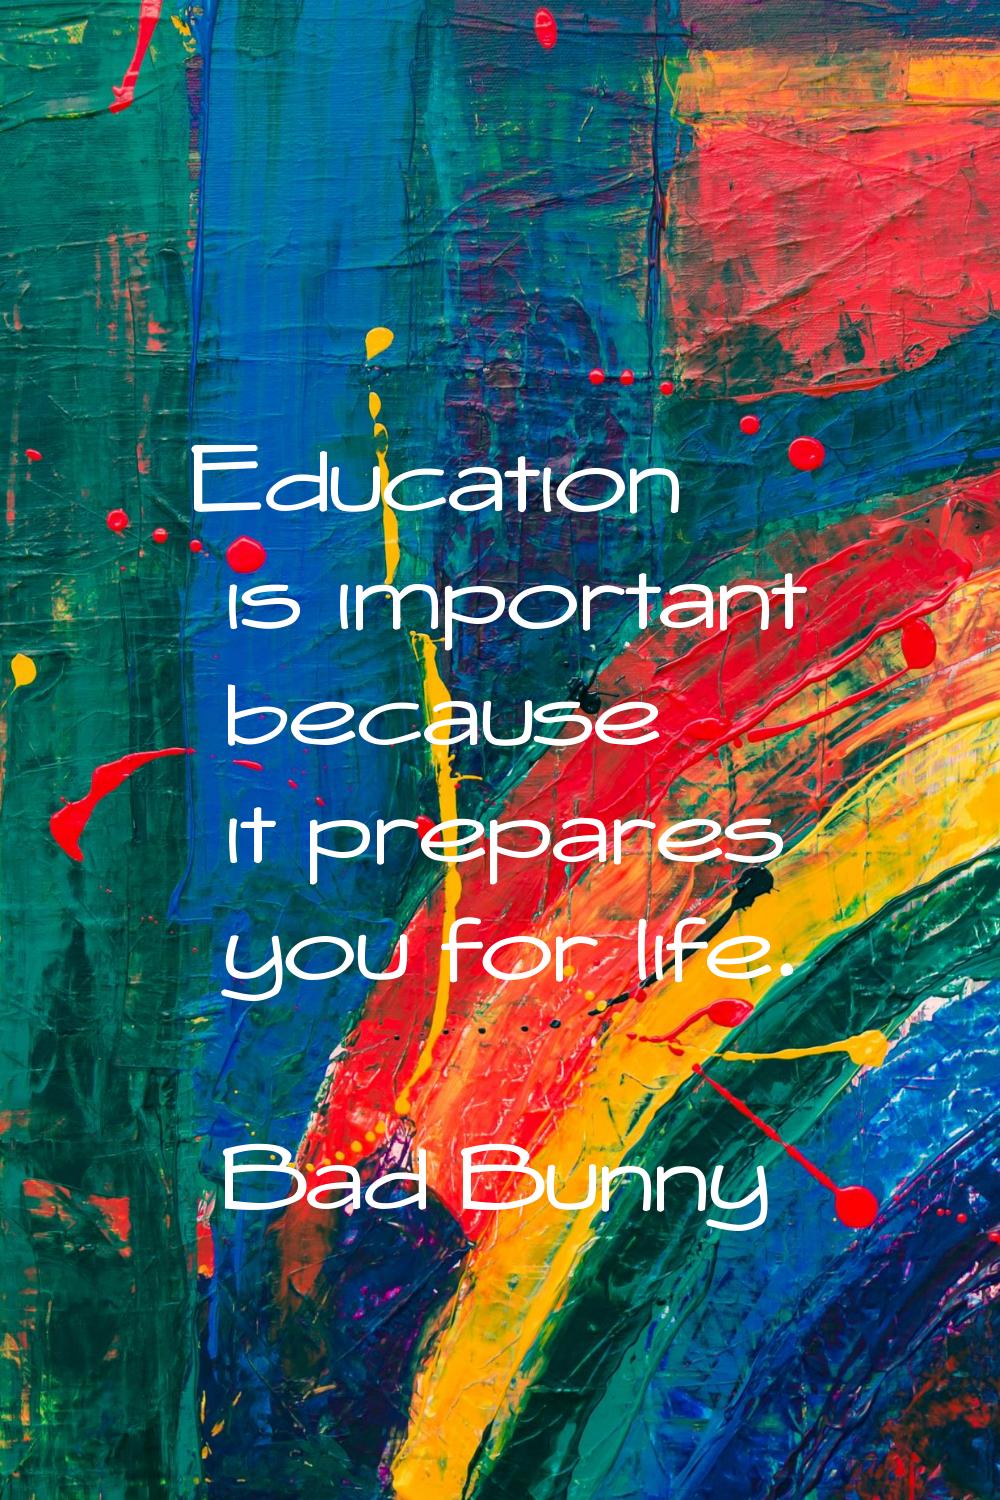 Education is important because it prepares you for life.